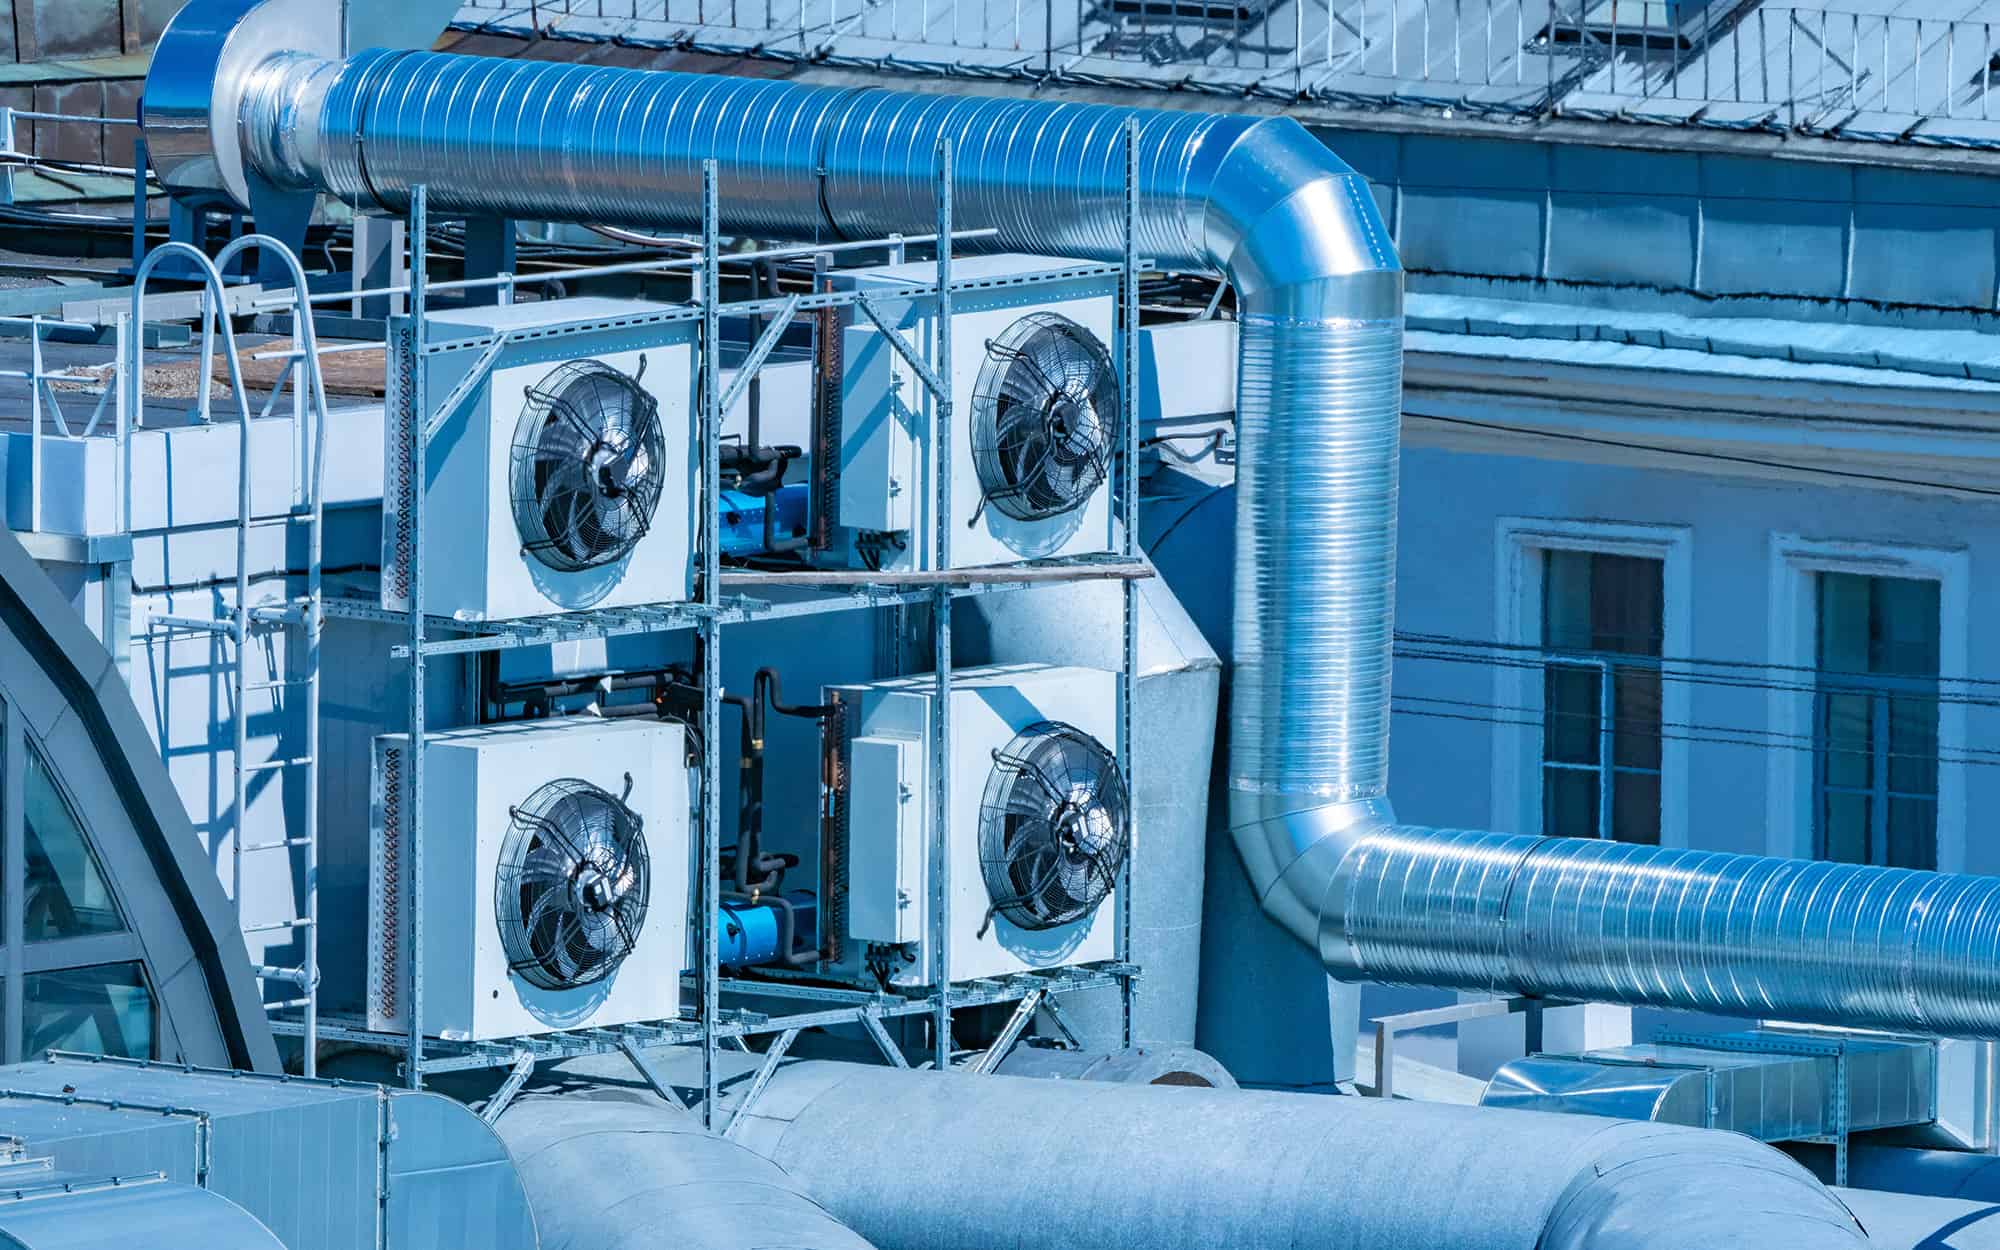 AC units and chiller start up